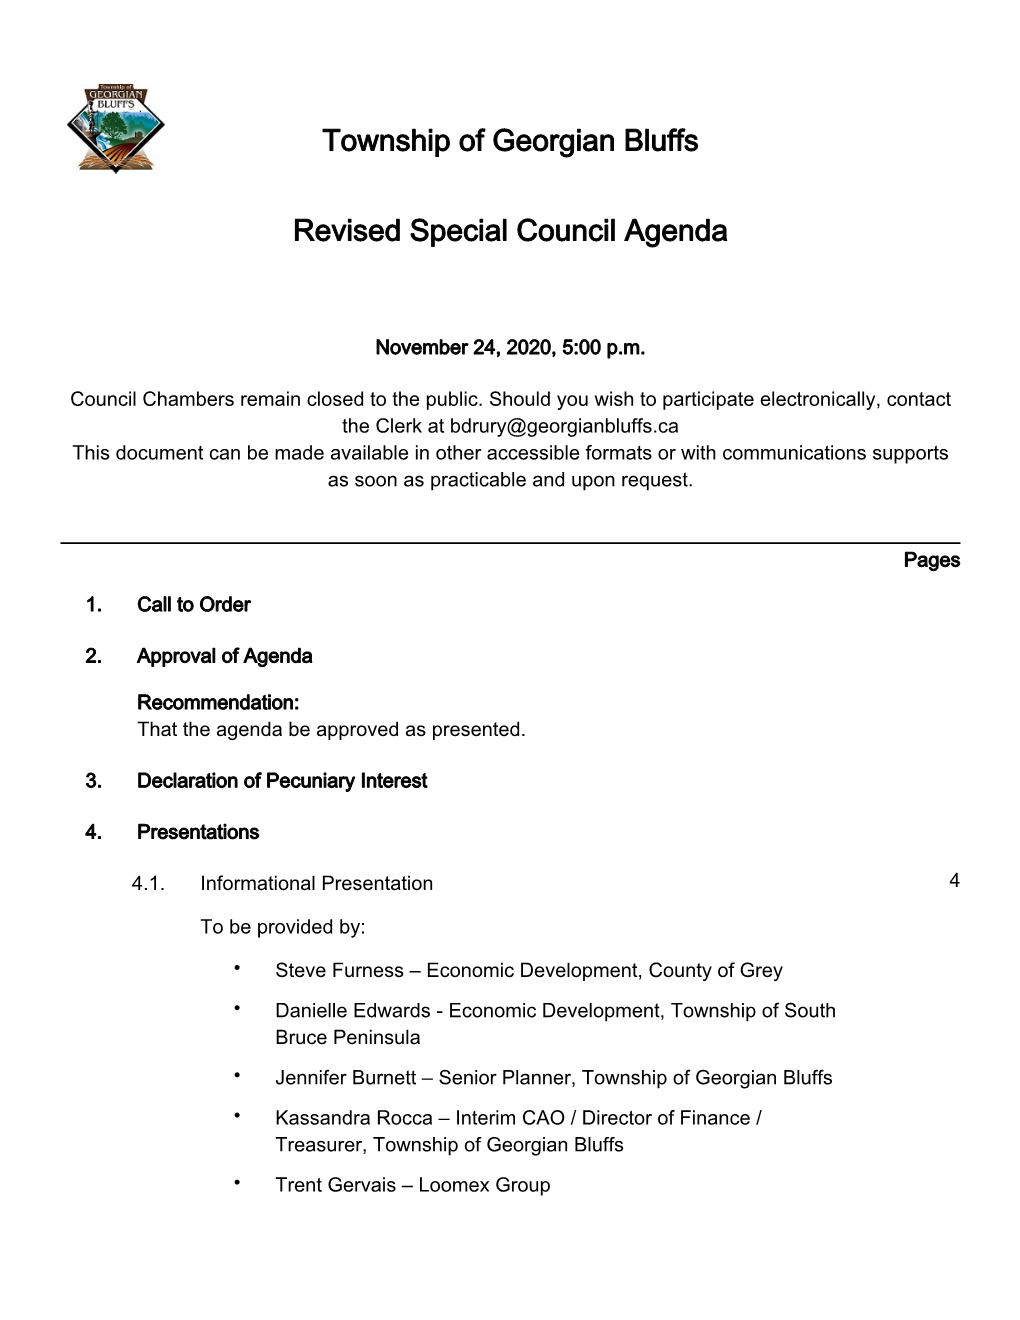 Township of Georgian Bluffs Revised Special Council Agenda